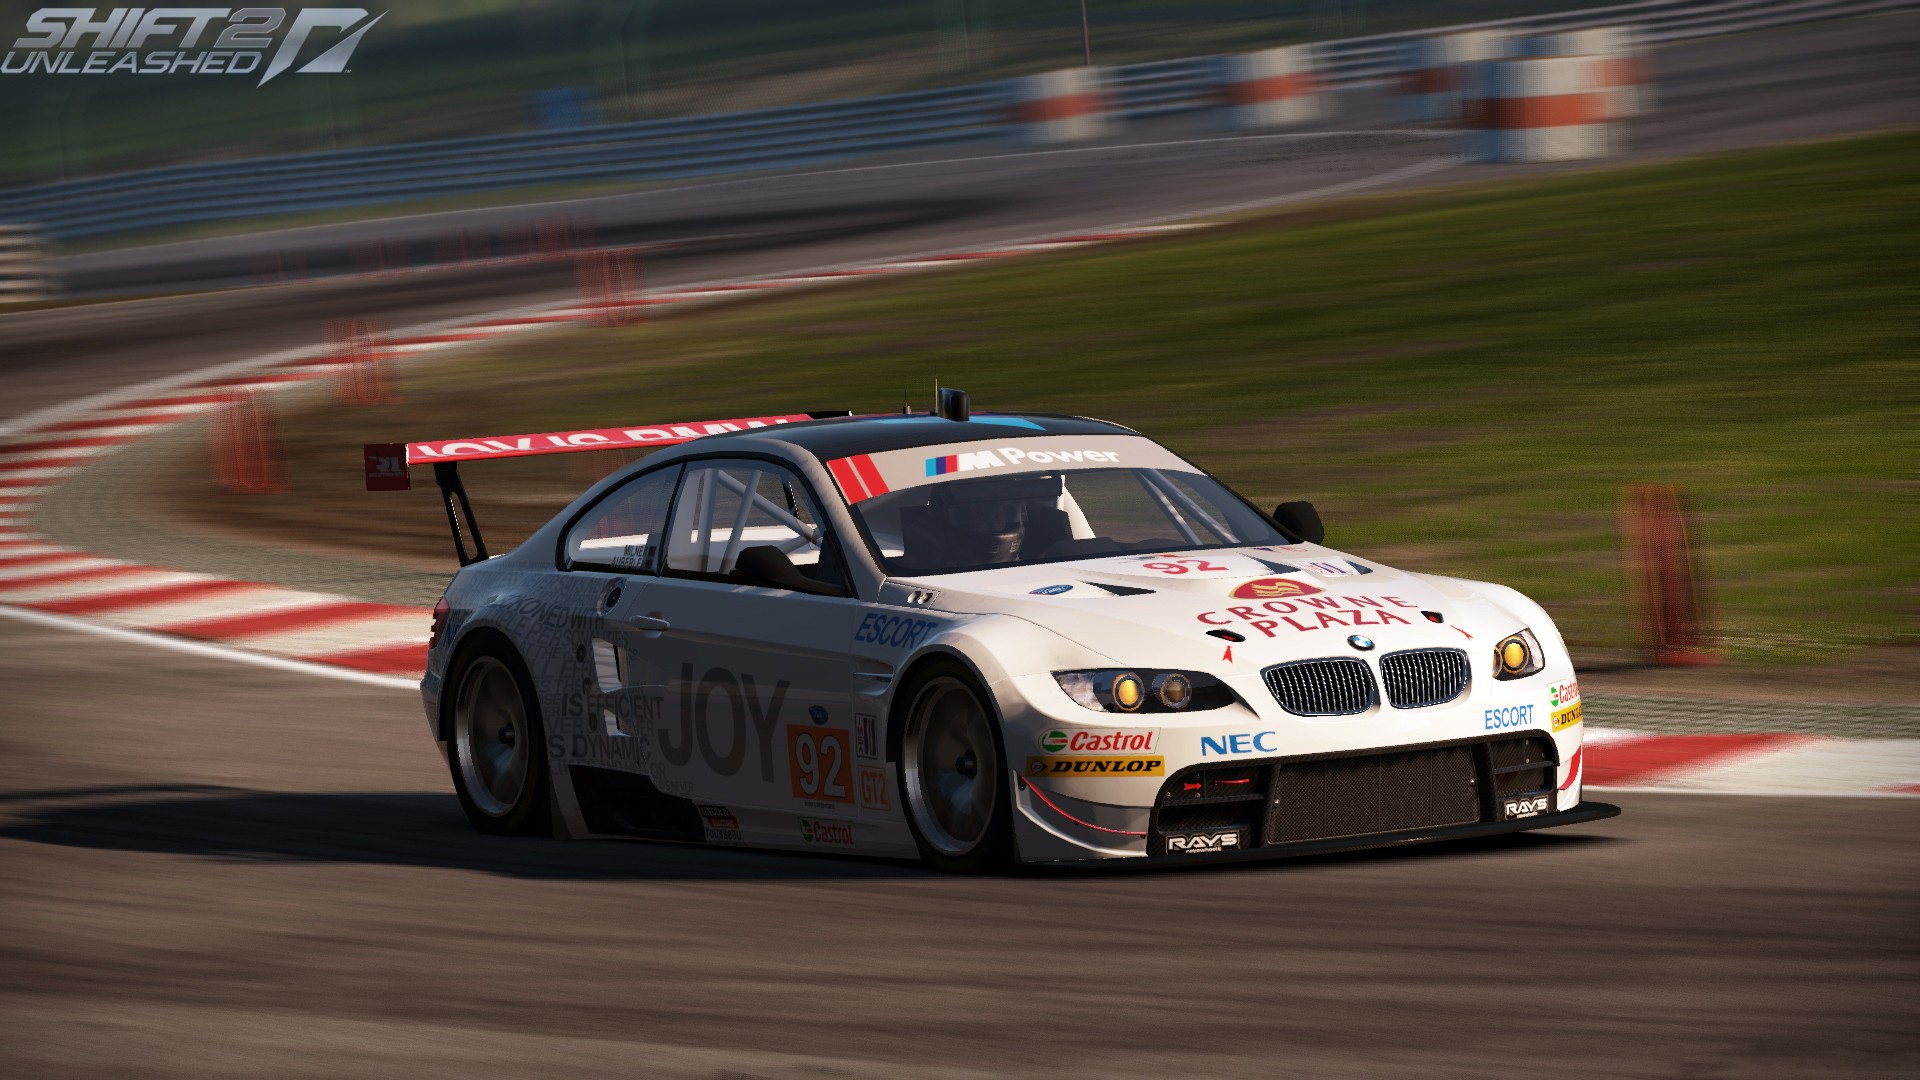 video, Games, Cars, Bmw, M3, Need, For, Speed, Shift, 2 , Unleashed, Pc, Games Wallpaper